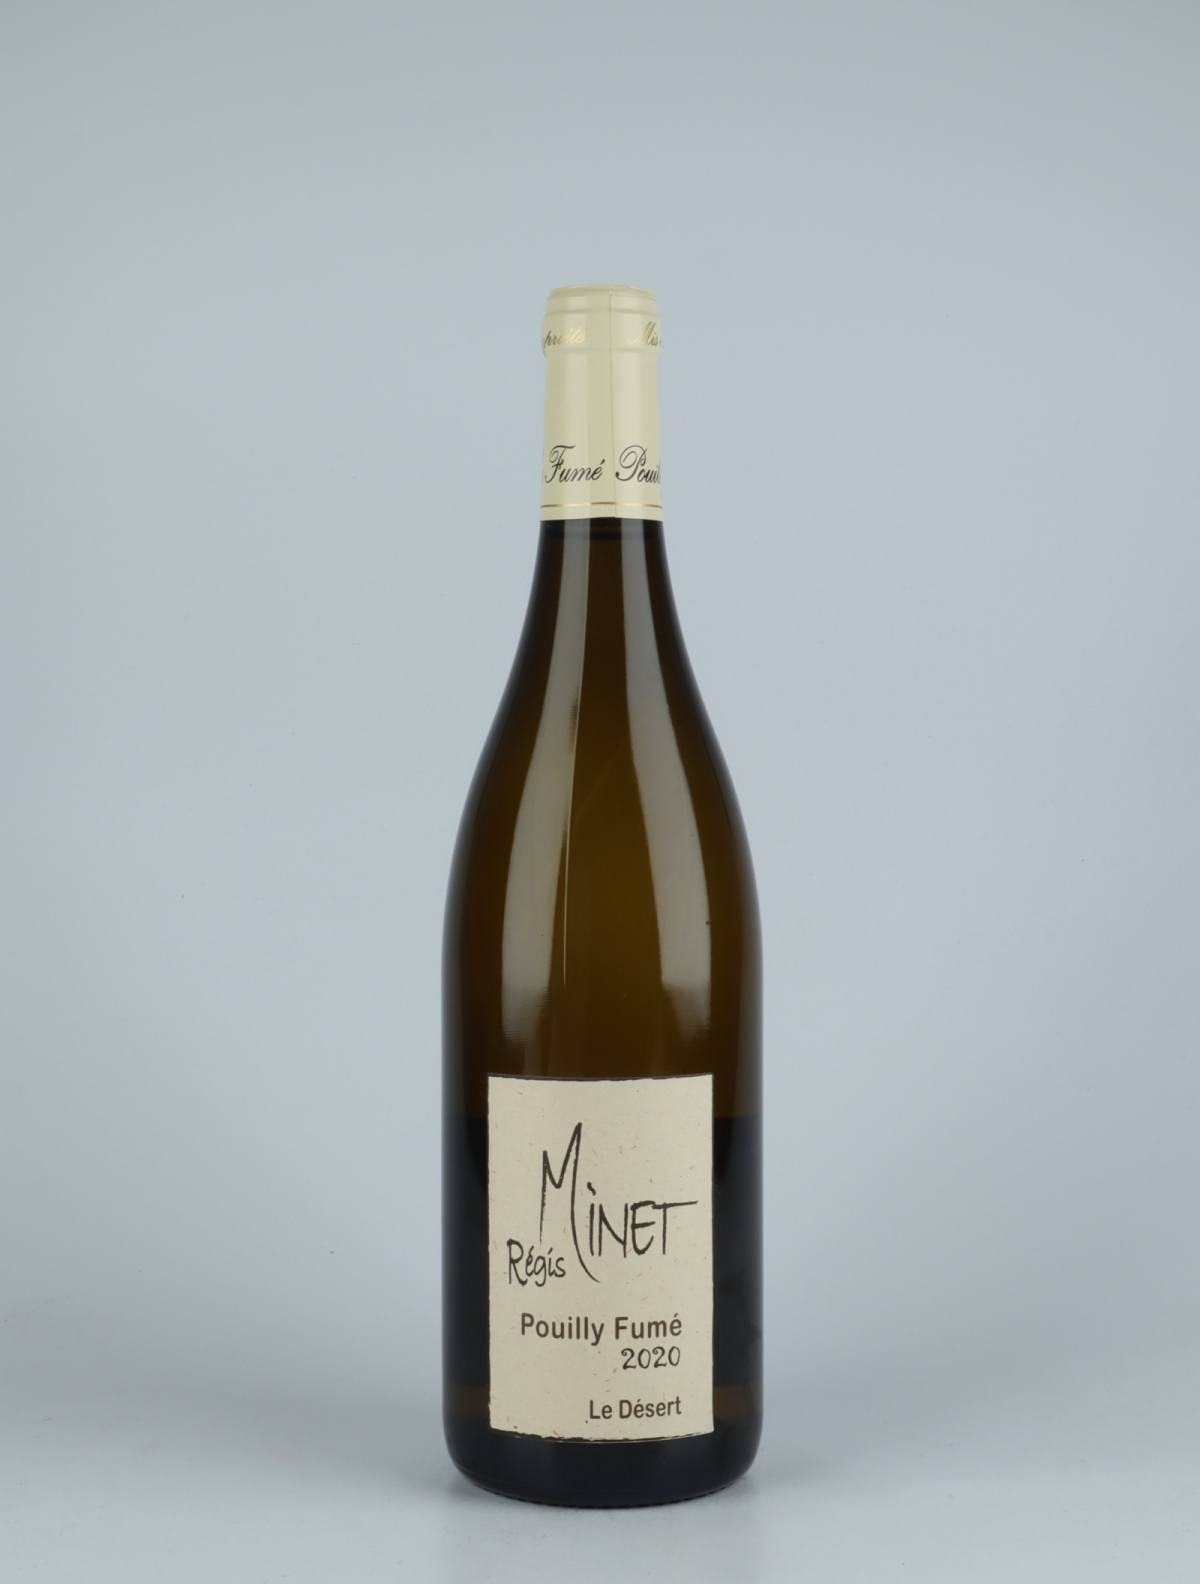 A bottle 2020 Pouilly Fumé - Le Desert White wine from , Loire in France